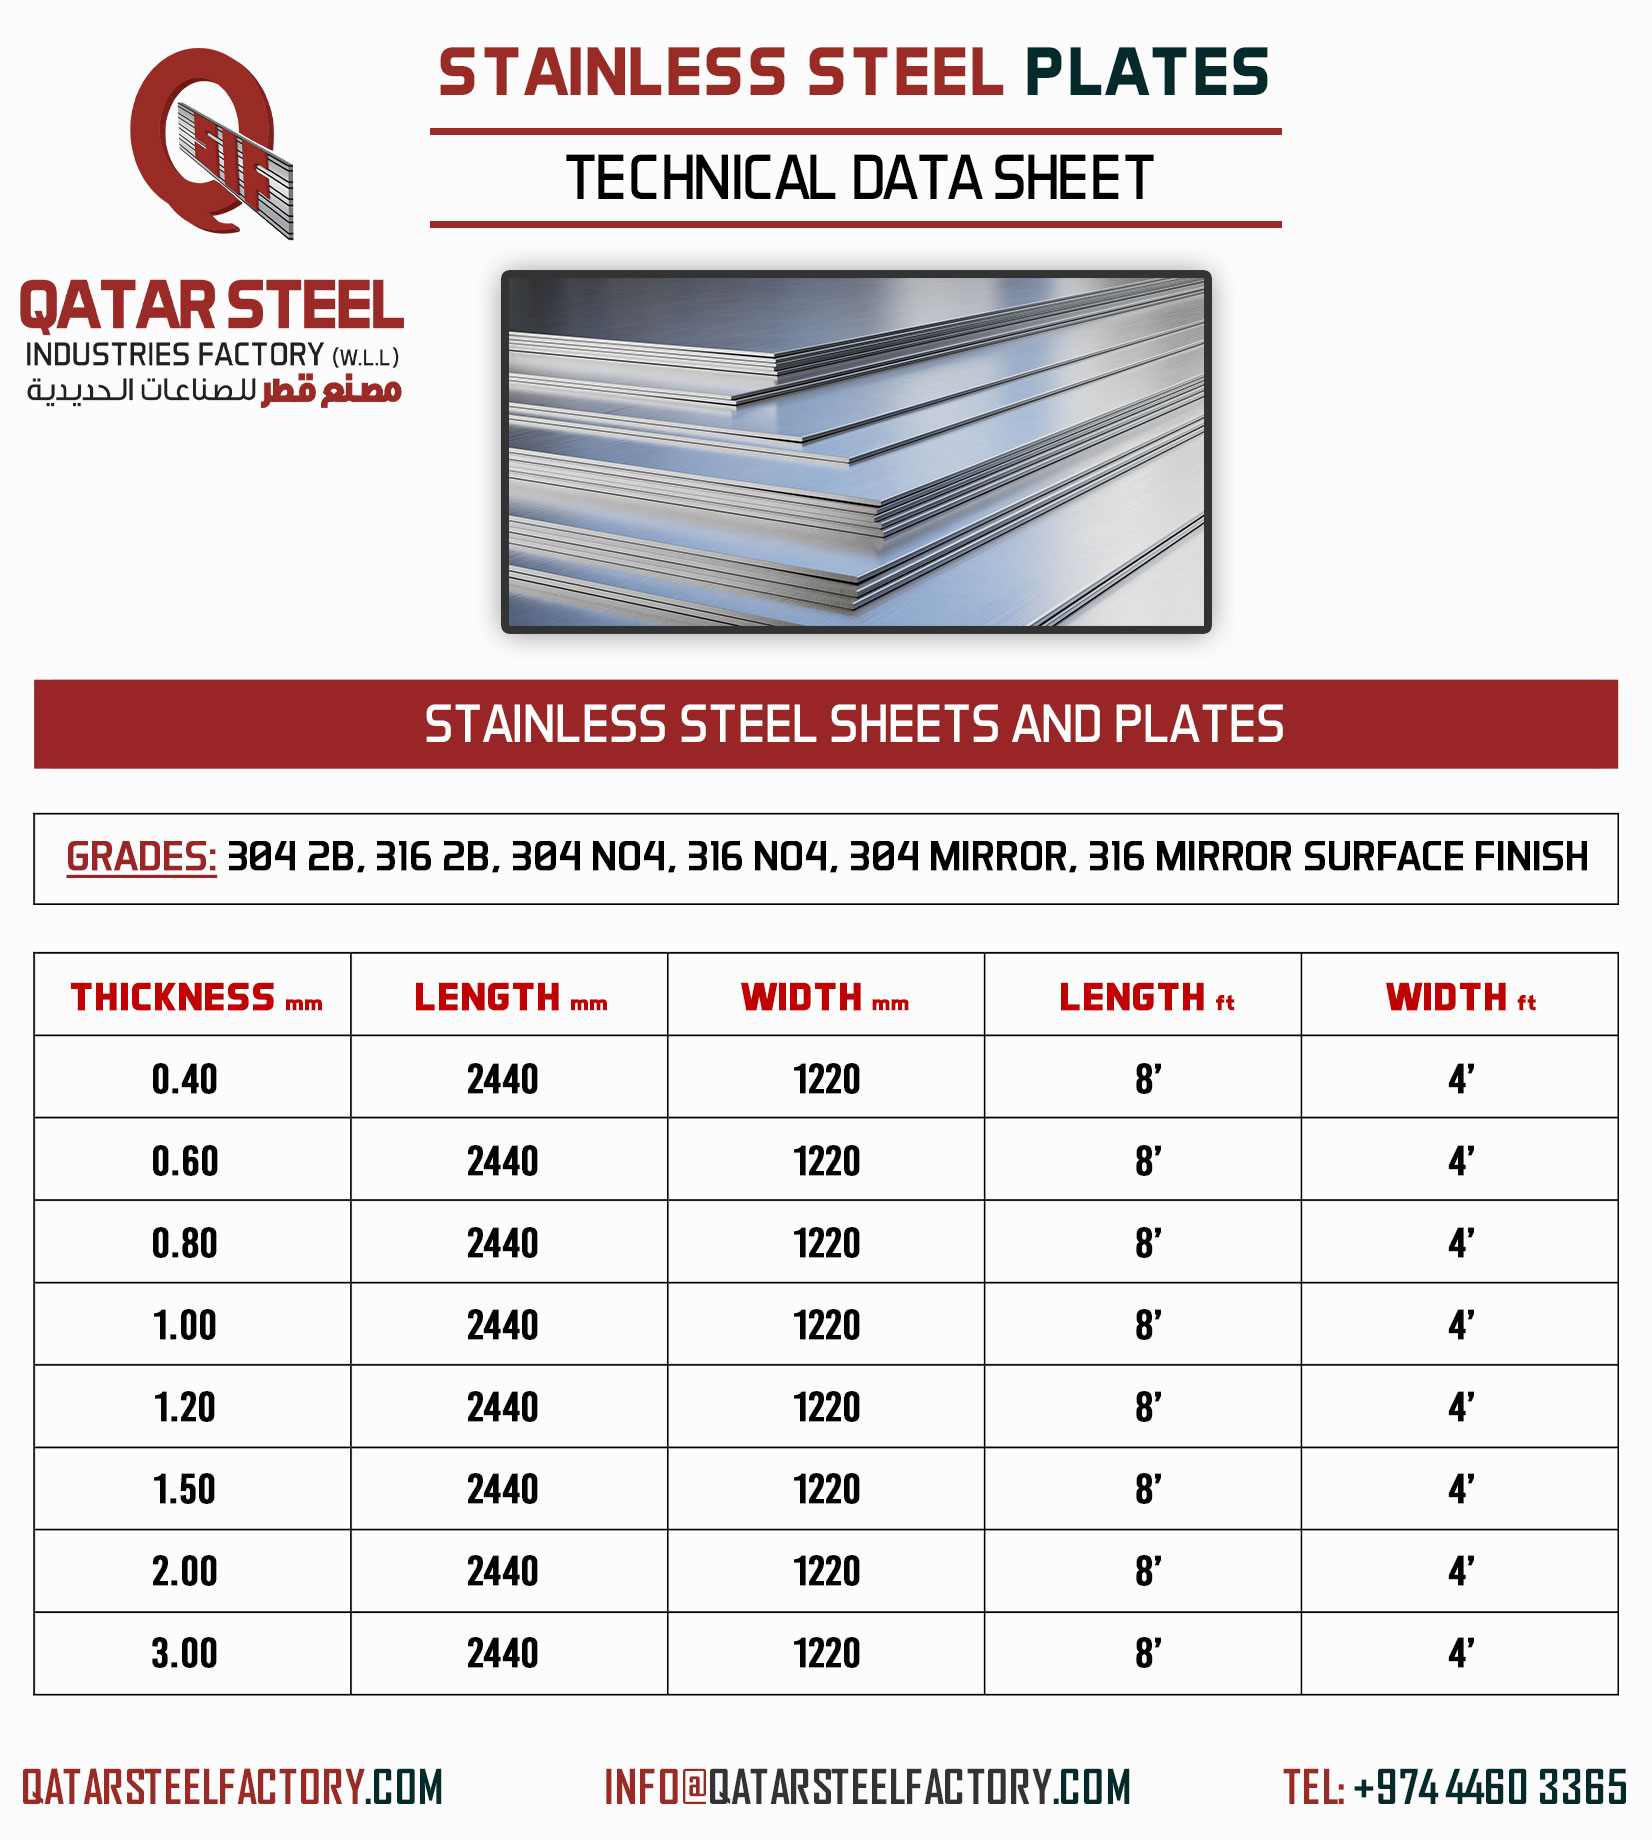 Stainless Steel Plates and Sheets Qatar Steel Factory